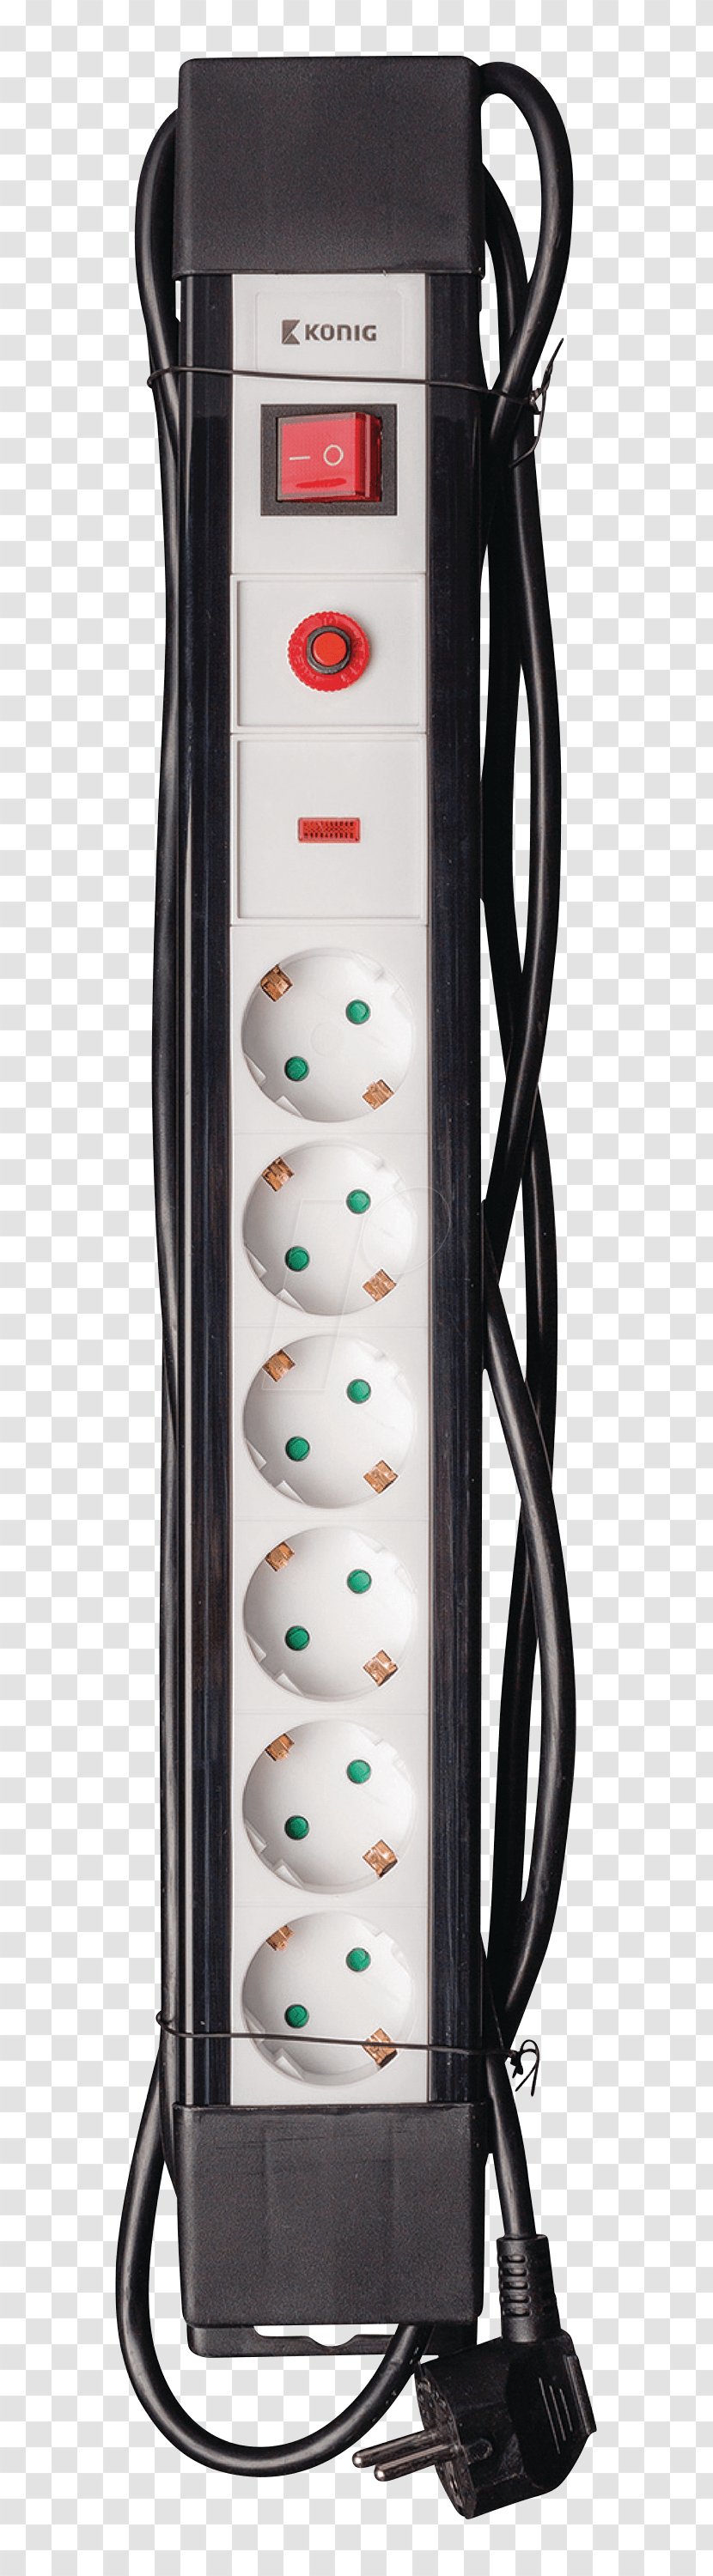 Power Strips & Surge Suppressors Extension Cords King AC Plugs And Sockets Computer Transparent PNG